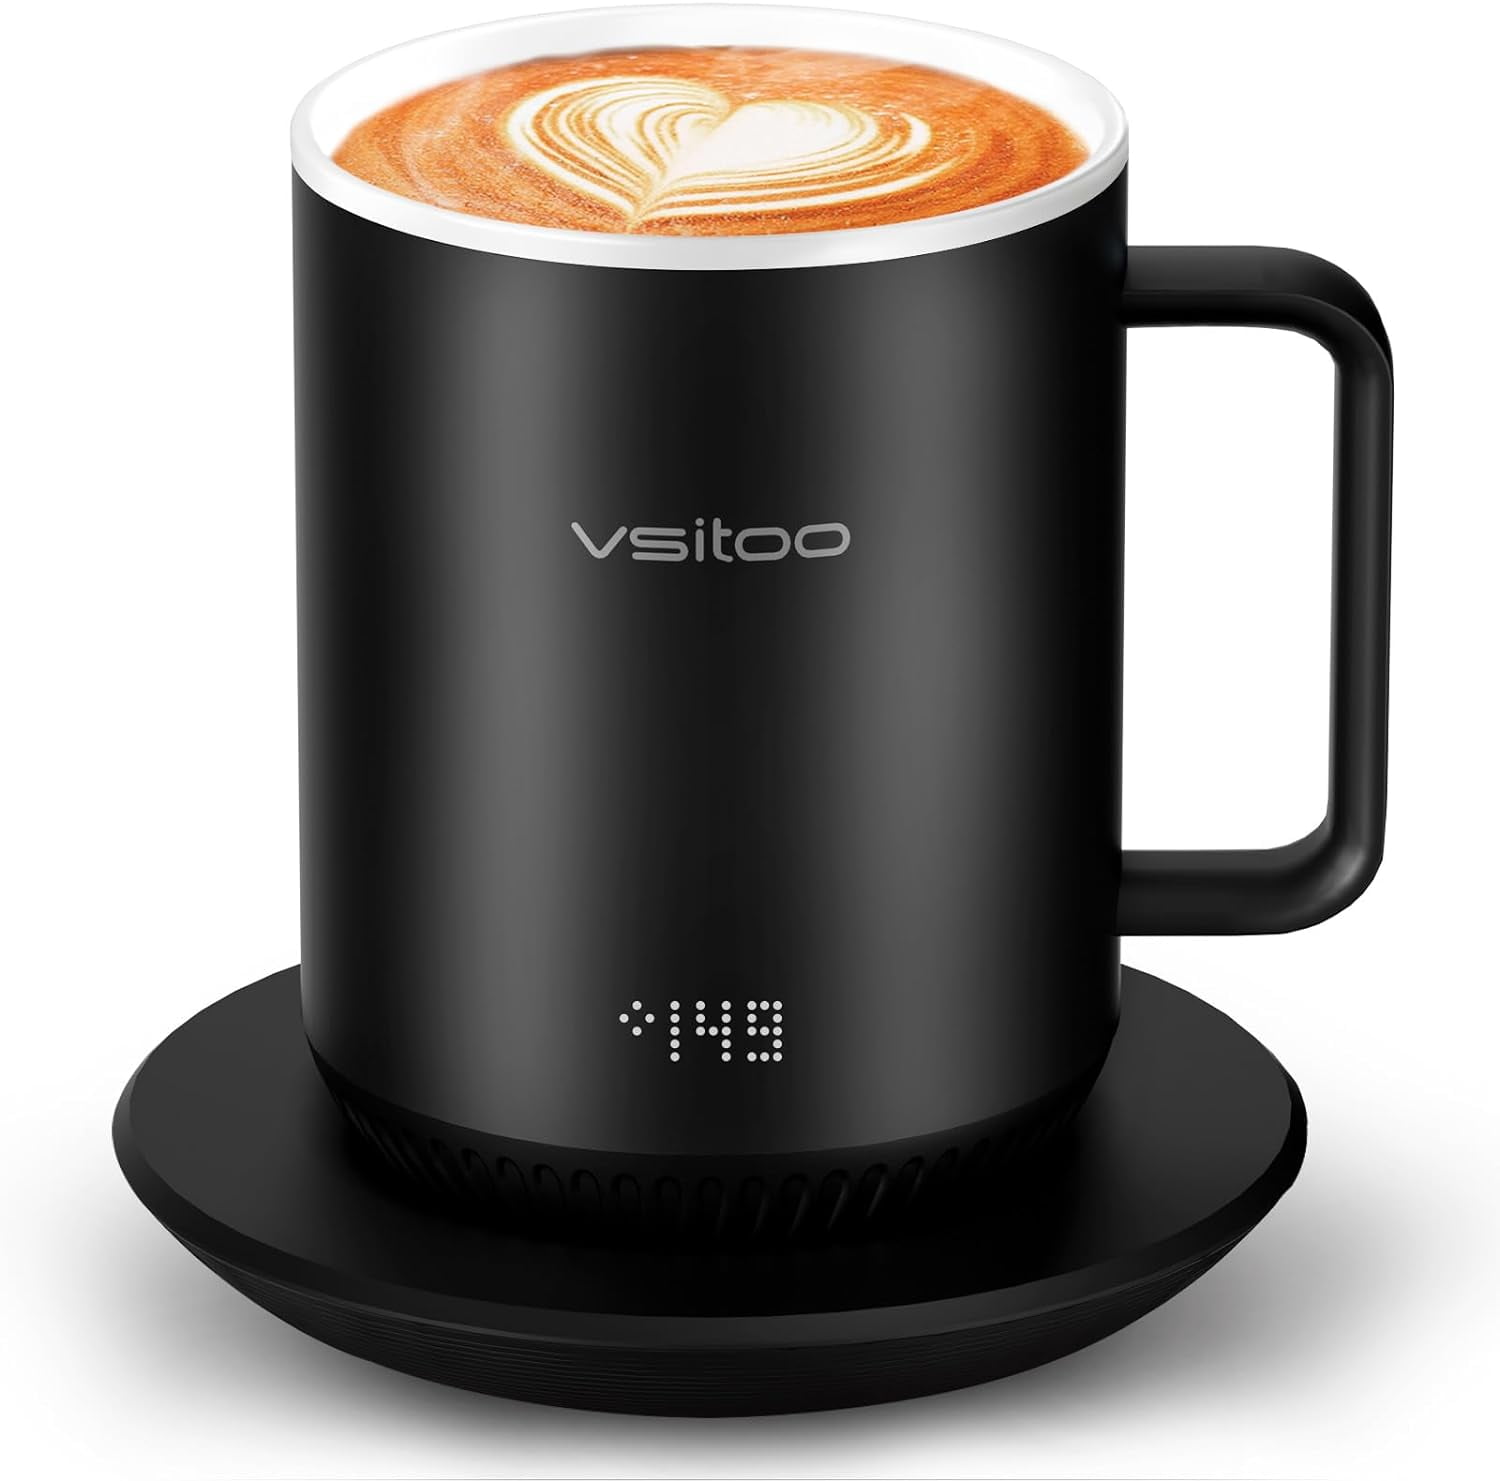 The best coffee mug warmers in 2021 - Android Authority